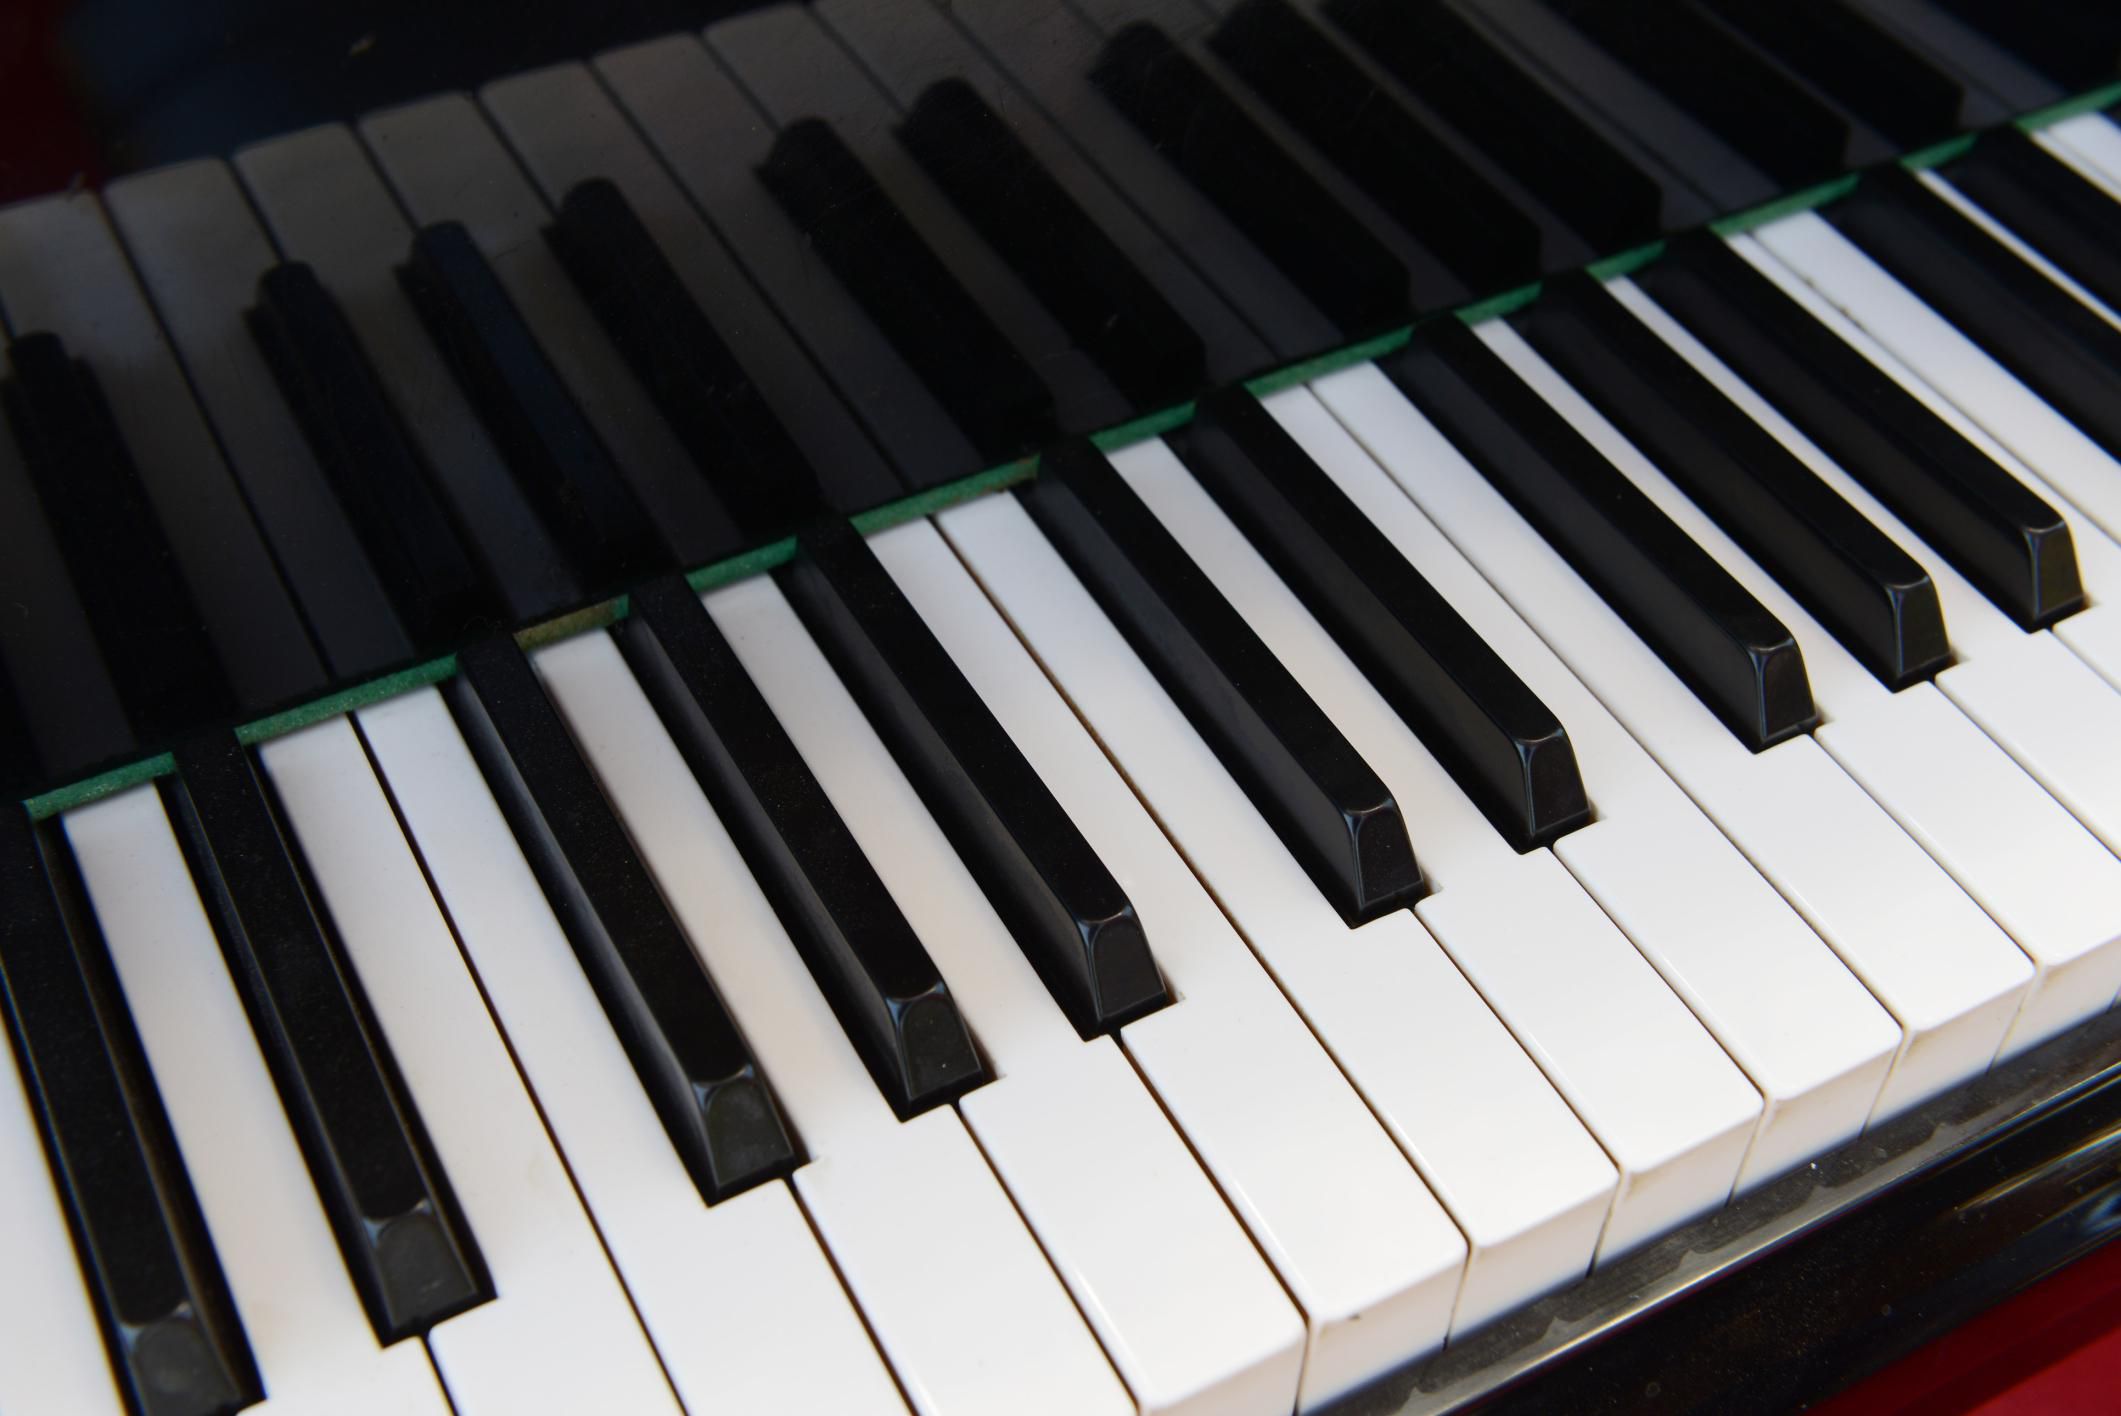 How to Safely Whiten Ivory Piano Keys